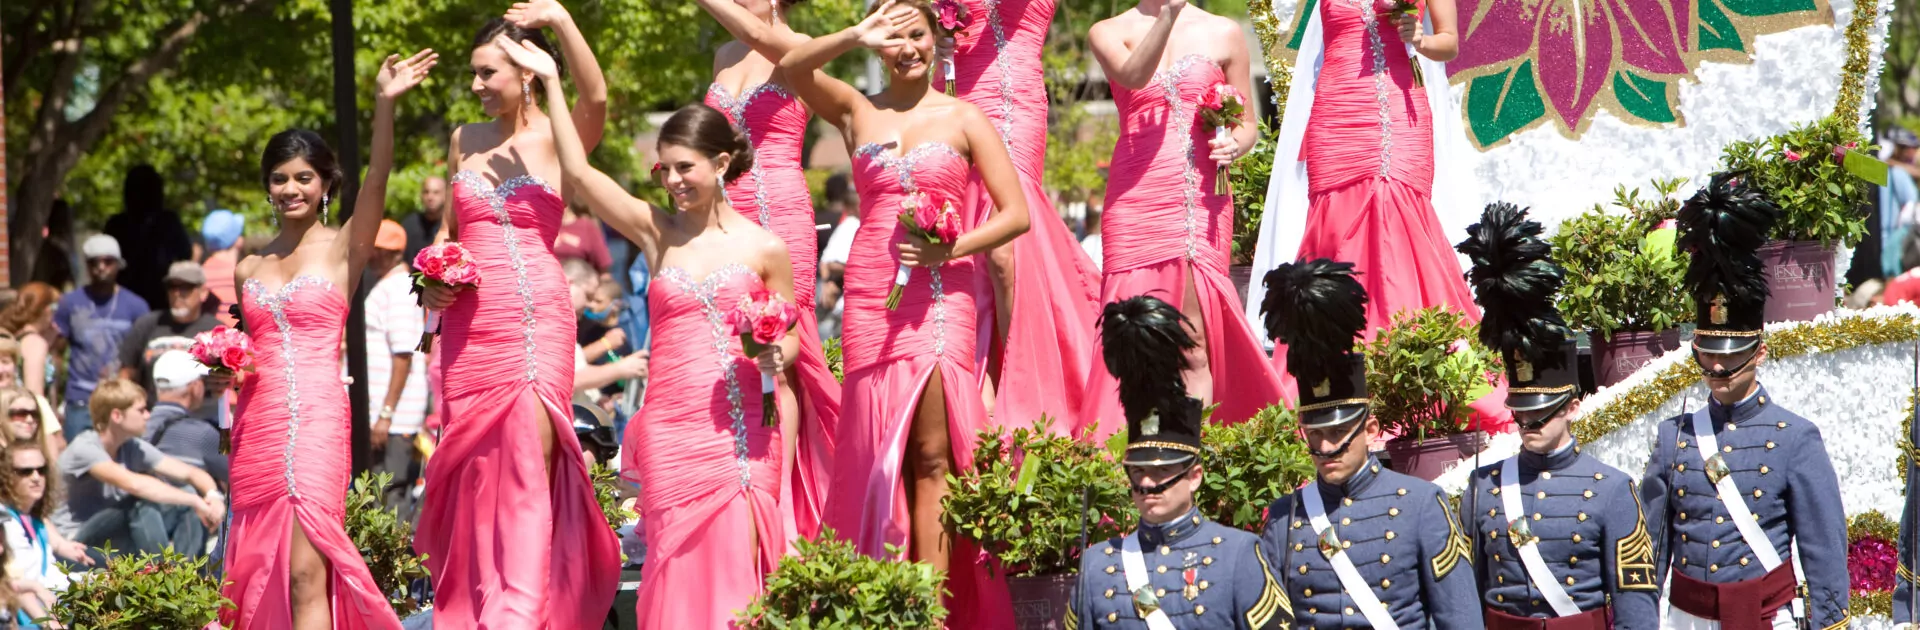 Women in matching pink dresses on a parade float for the Azalea Festival.